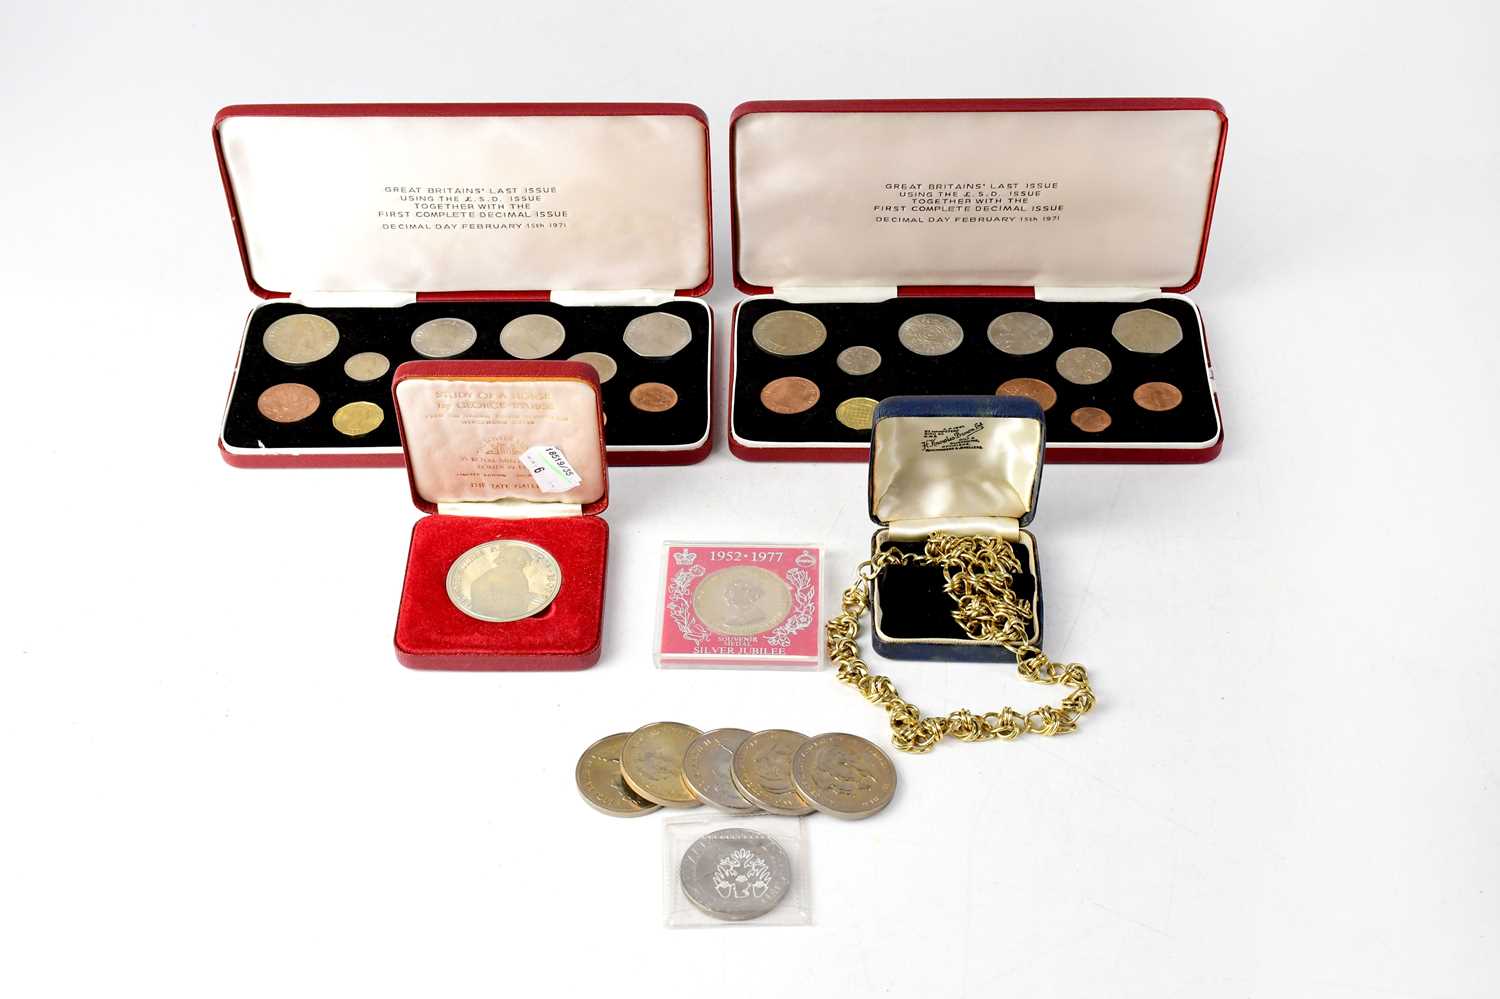 Two cased sets of mint Elizabeth II 'Great Britain's Last Issue Using the £.s.d', together with